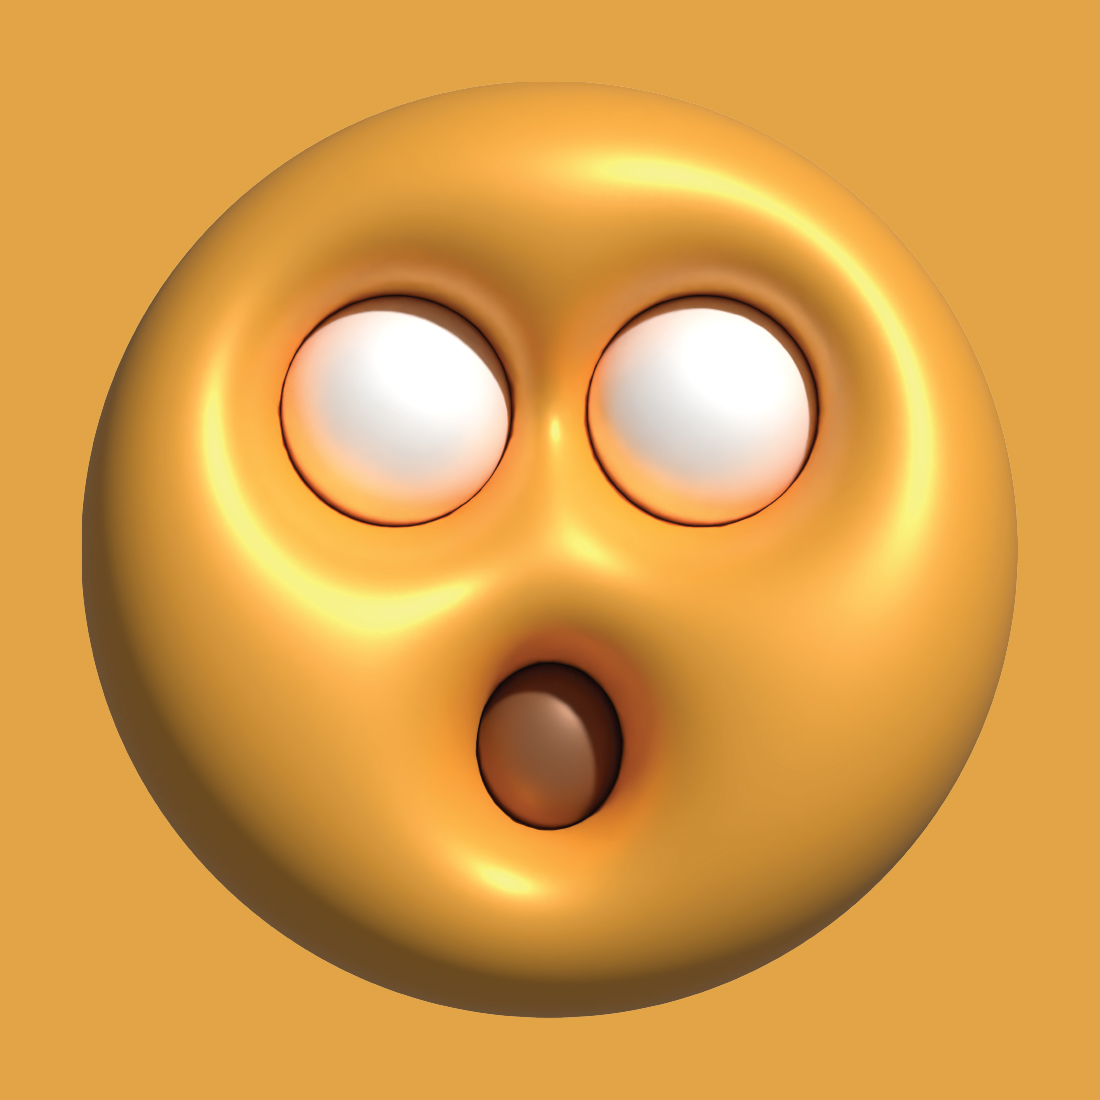 3D Emoticon Freebies cover image.